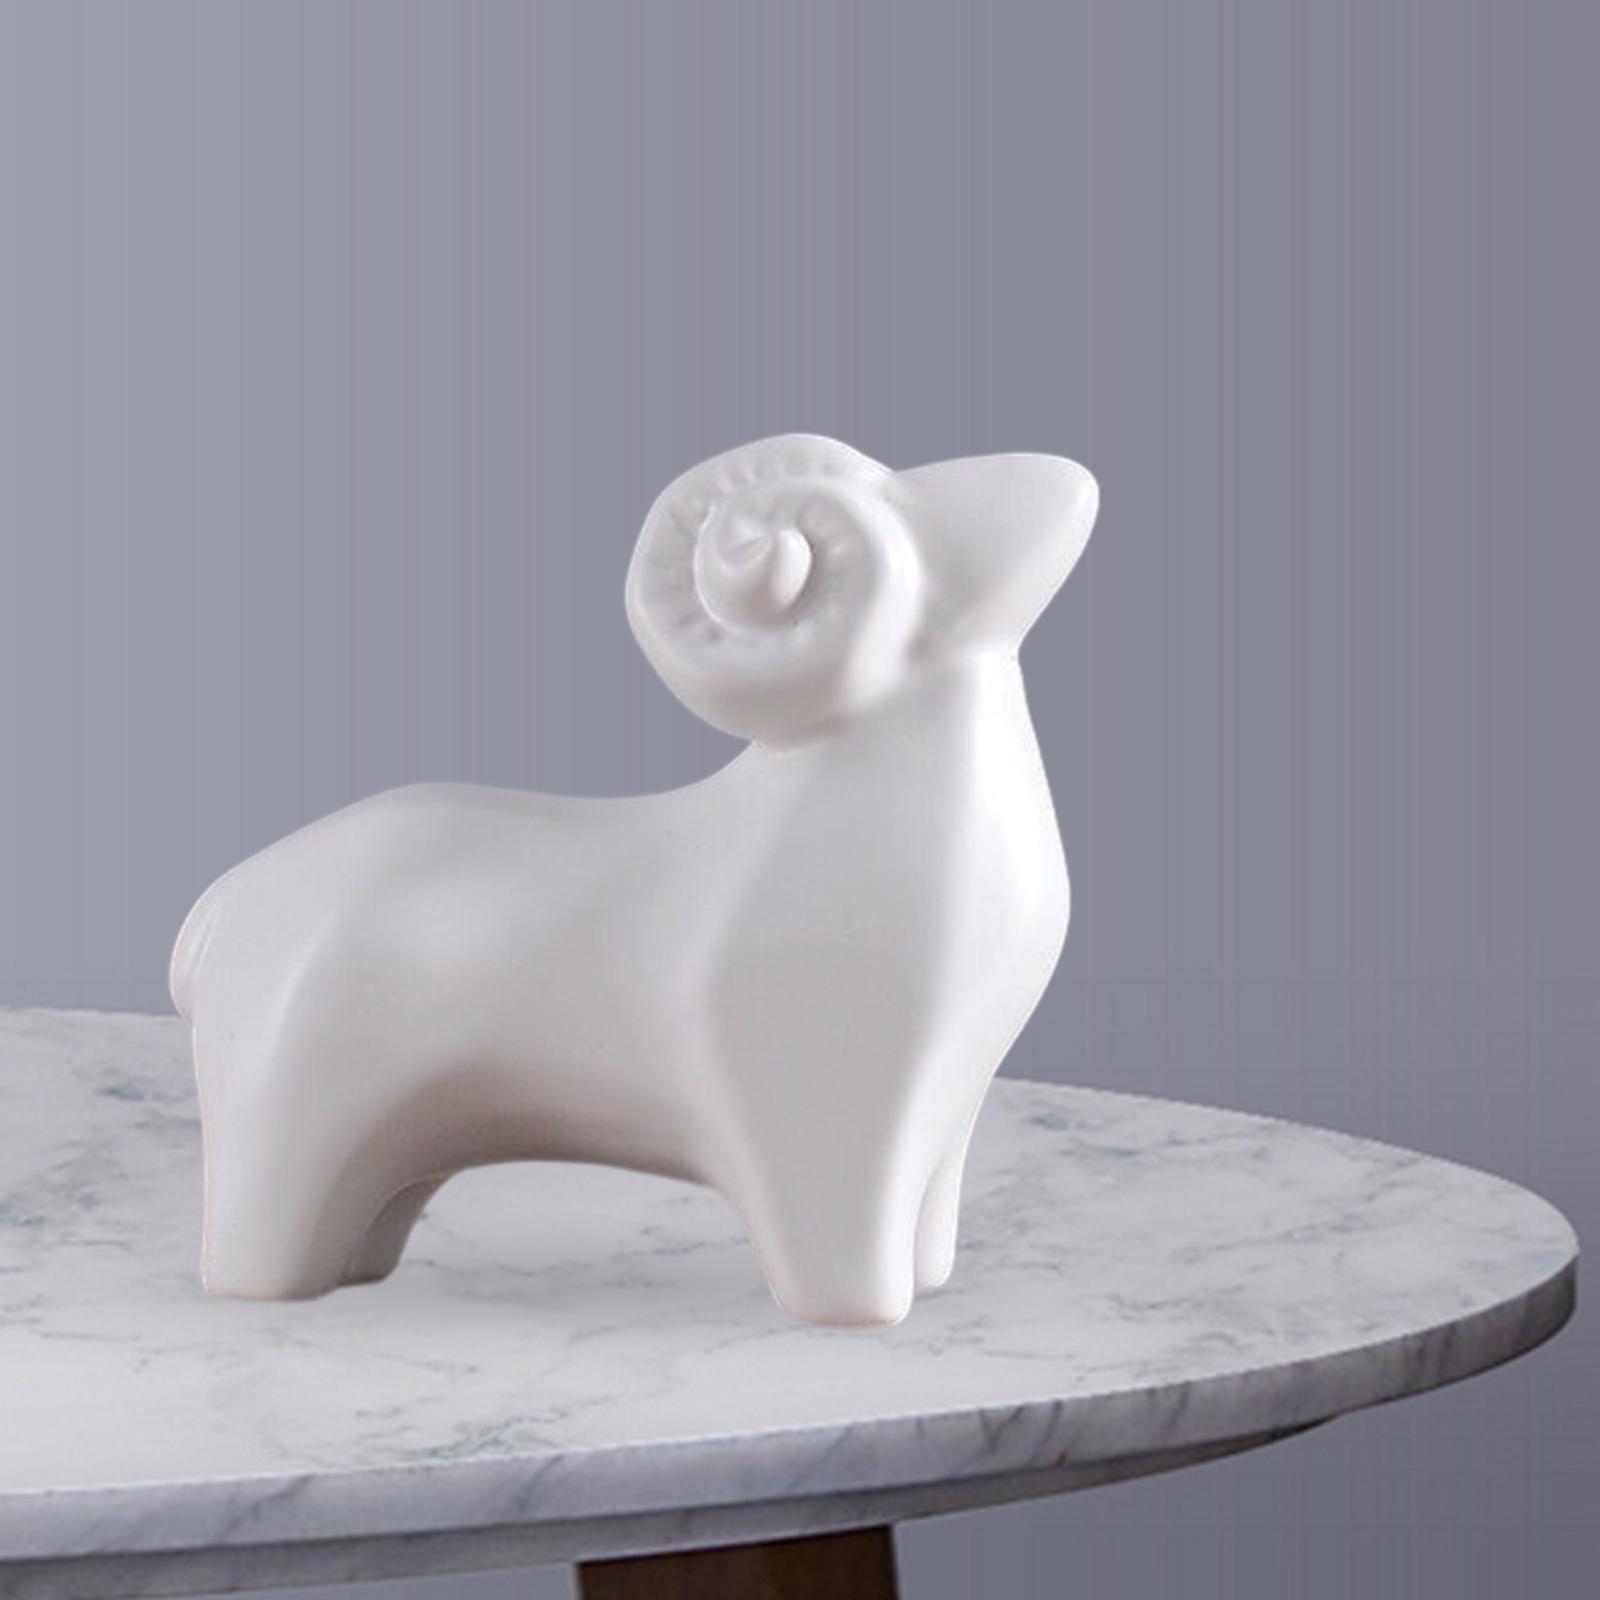 Creative Sheep Statue, Porcelain Nordic Collectable Ornament Animal Figurine for Desktop Bedroom Shop Bookshelf Decoration White Small - image 1 of 8